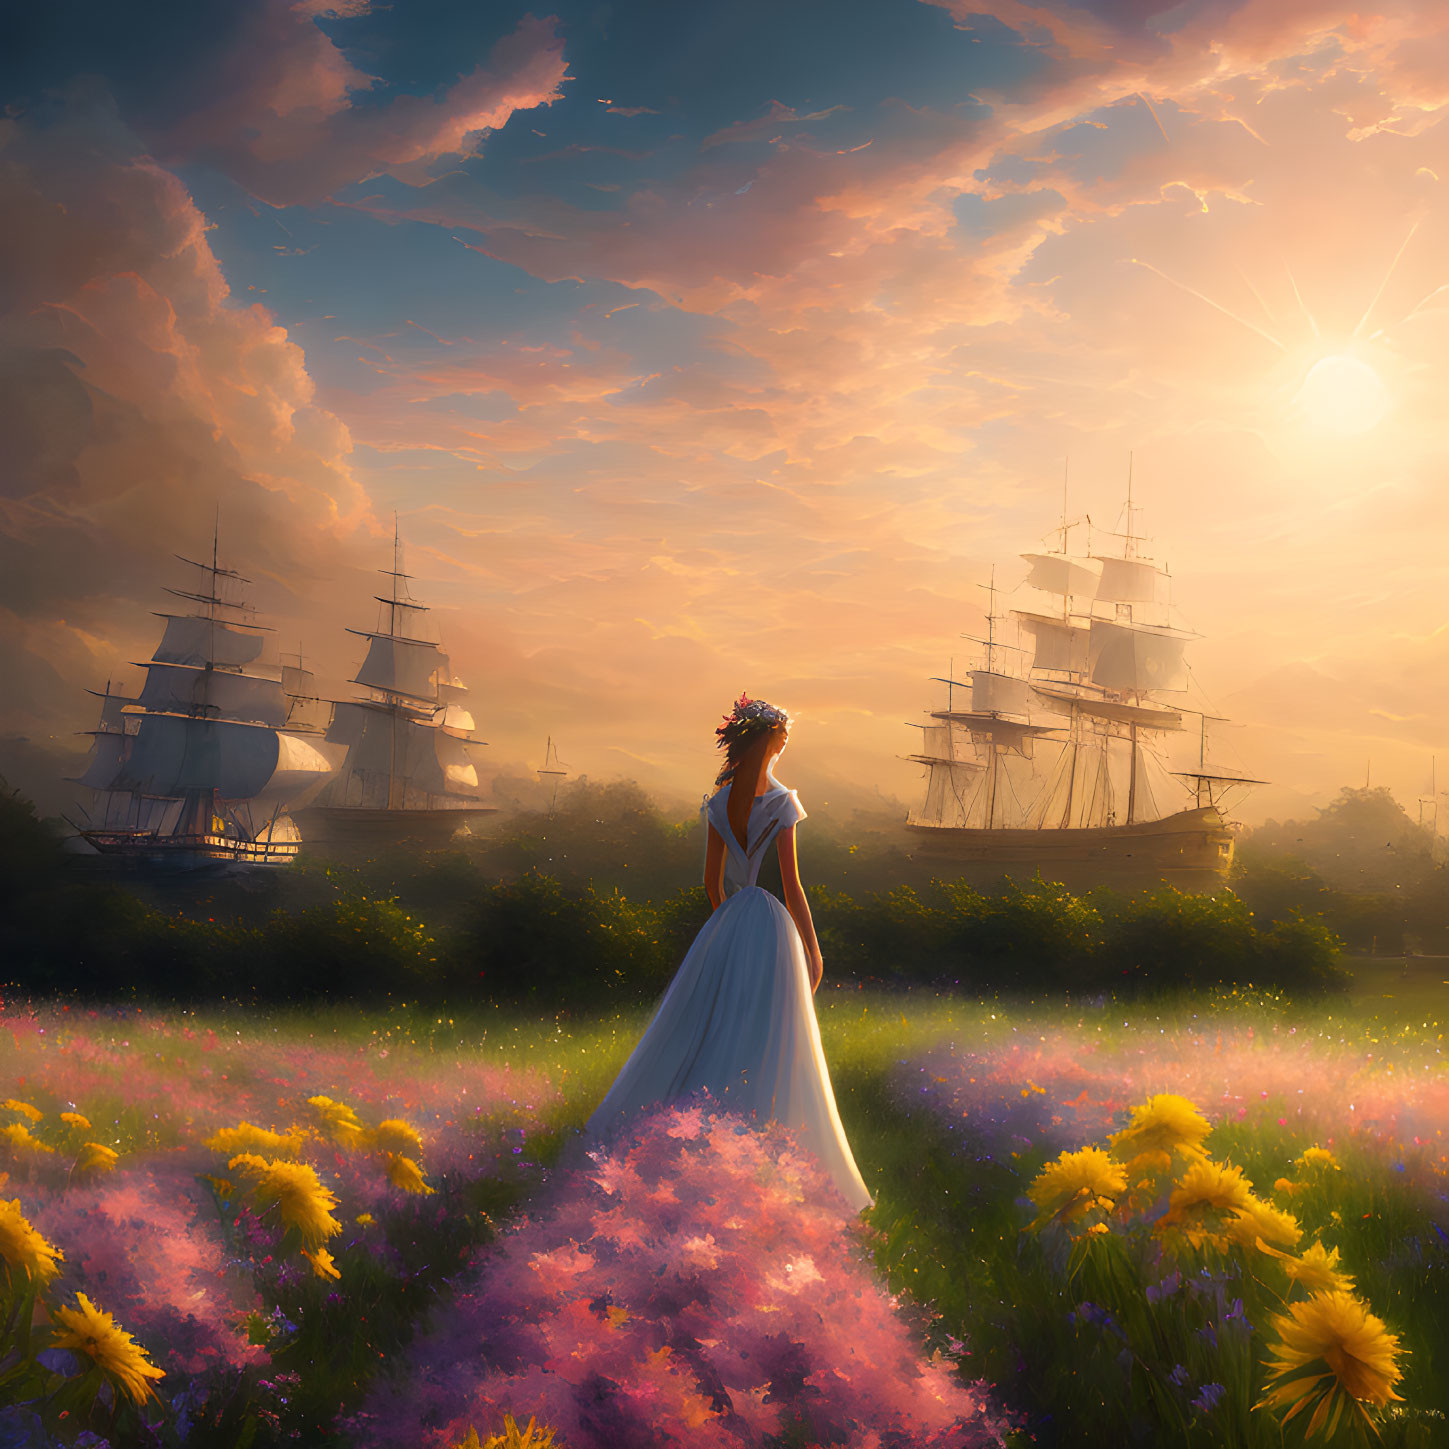 Woman in white dress in vibrant flower field at sunset with tall ships and dramatic sky.